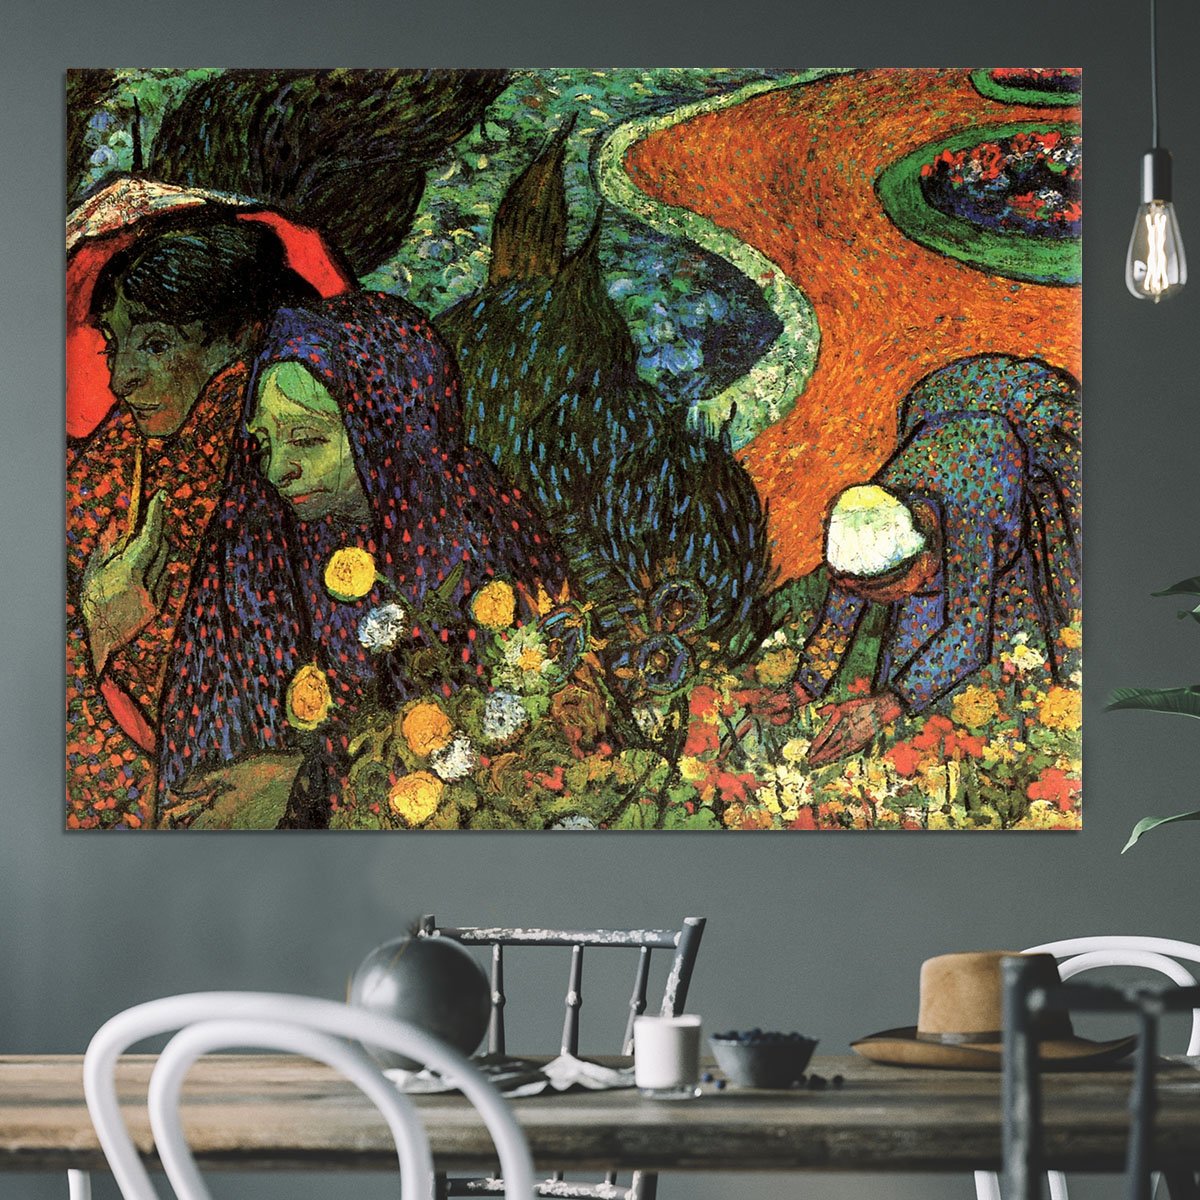 Memory of the Garden at Etten by Van Gogh Canvas Print or Poster